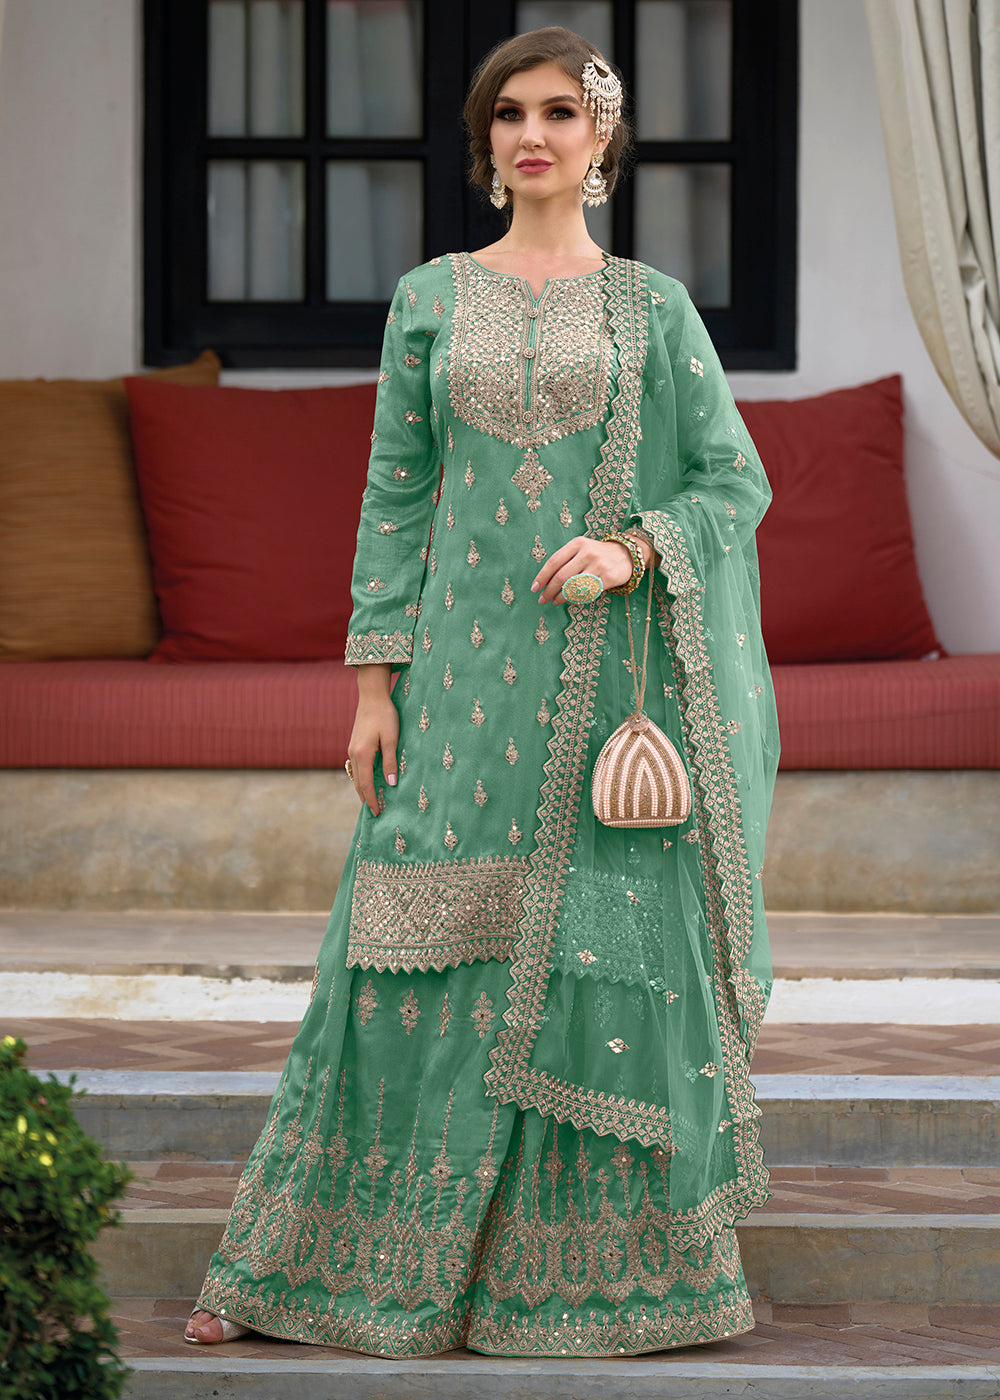 Shop Now Festive Attractive Sea Green Heavy Silk Sharara Suit Online at Empress Clothing in USA, UK, Canada, Italy & Worldwide.